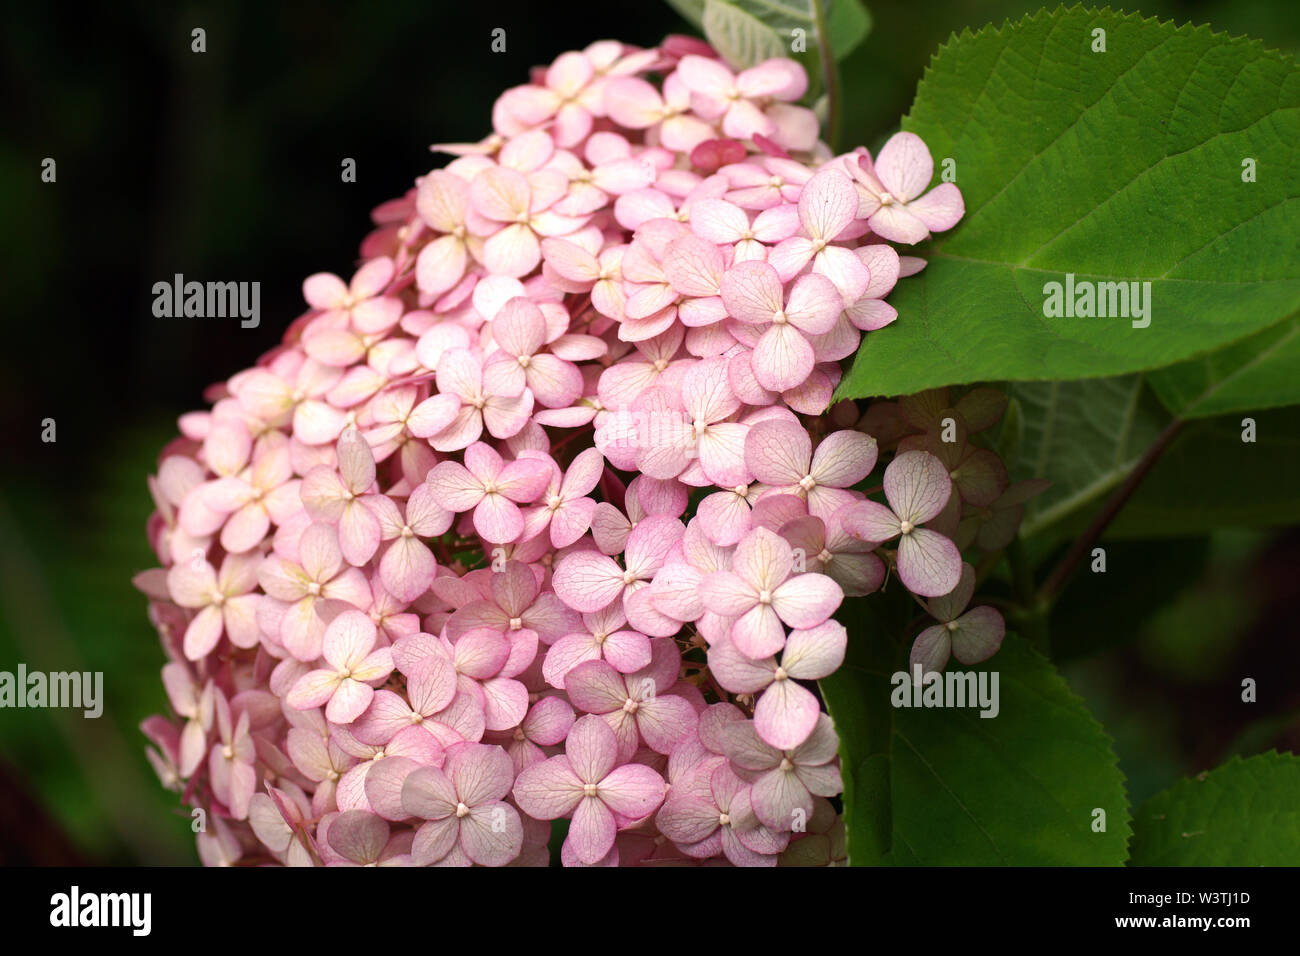 Hydrangea arborescens Incrediball Blush or Sweet Annabelle pink a corymb. Flower close up. Stock Photo